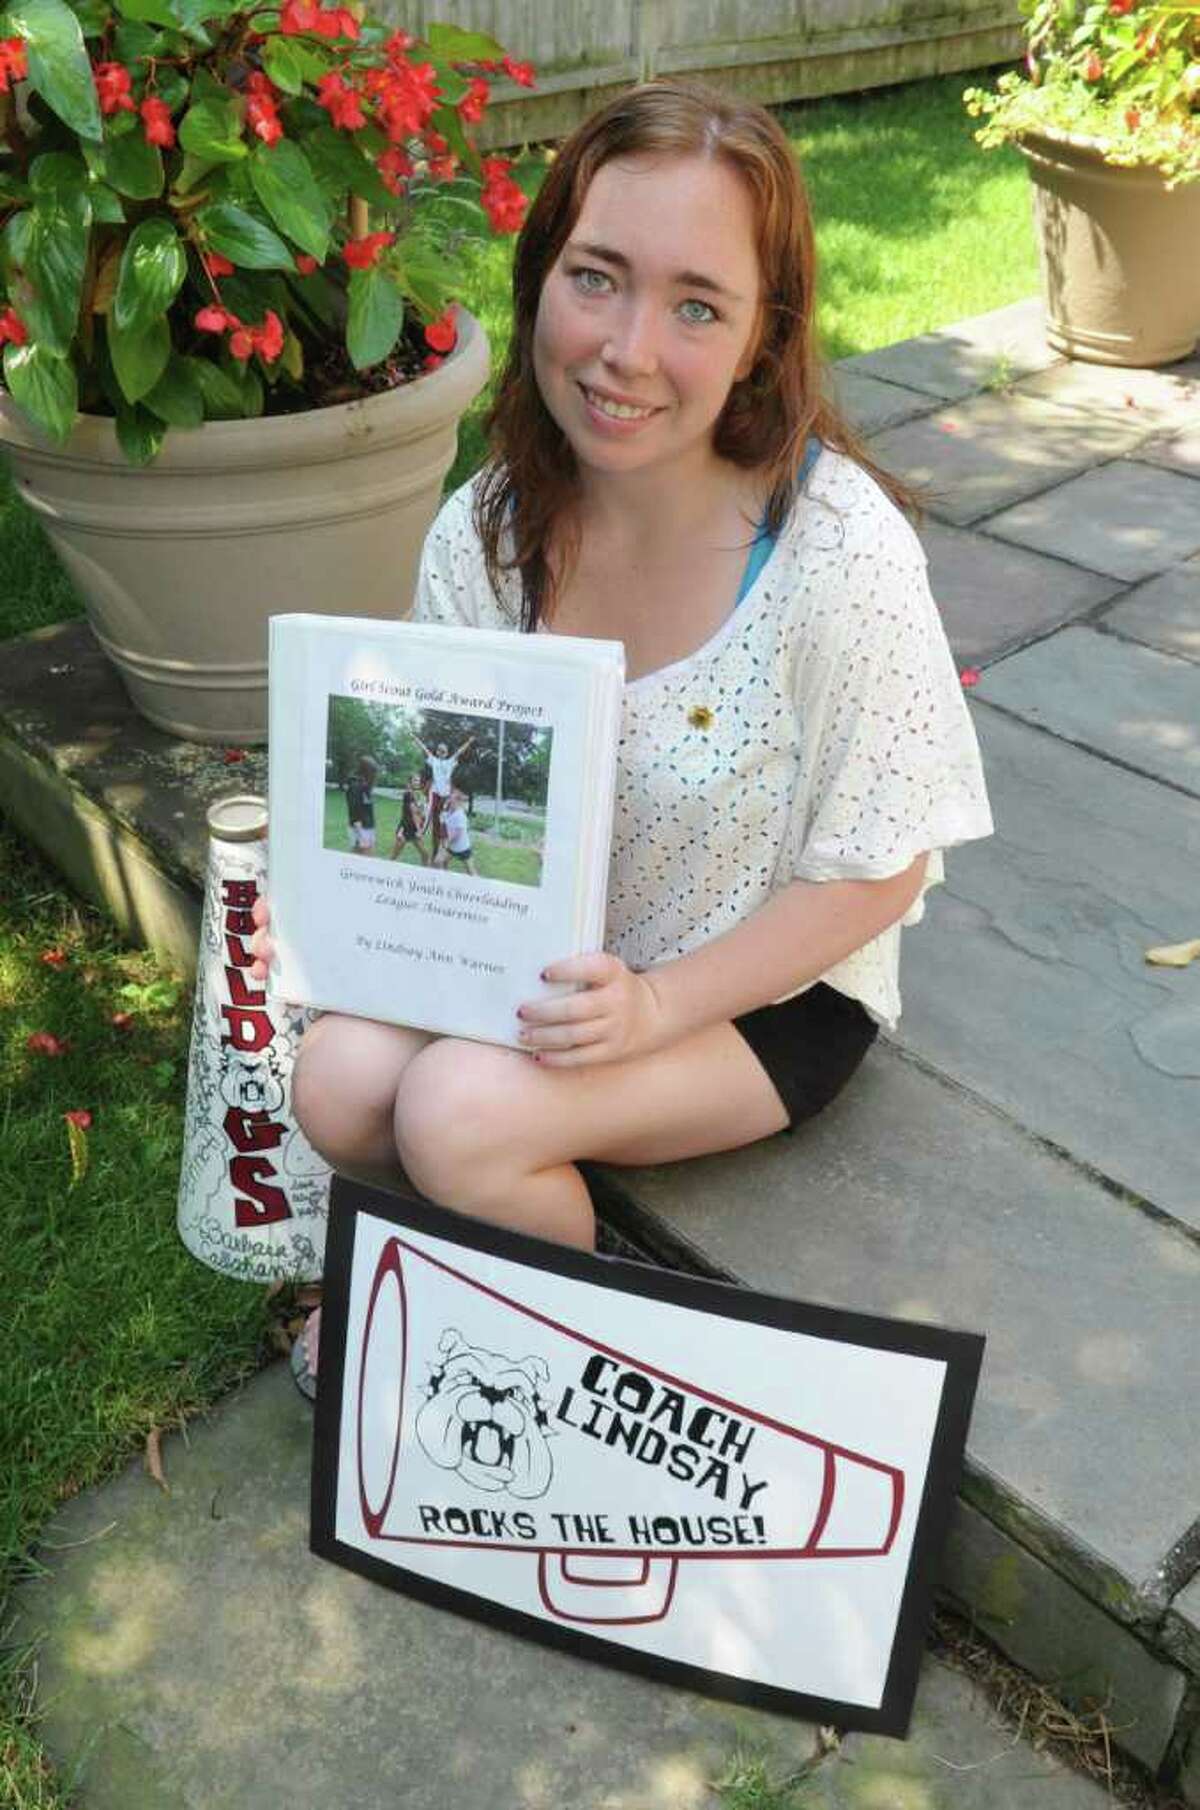 Lindsay Warner, 18, recently earned her Girl Scout Gold Award for her work with young Mianus Bulldogs cheerleaders. She sits with Girl Scout Award Project file on Tuesday, July 19, 2011.